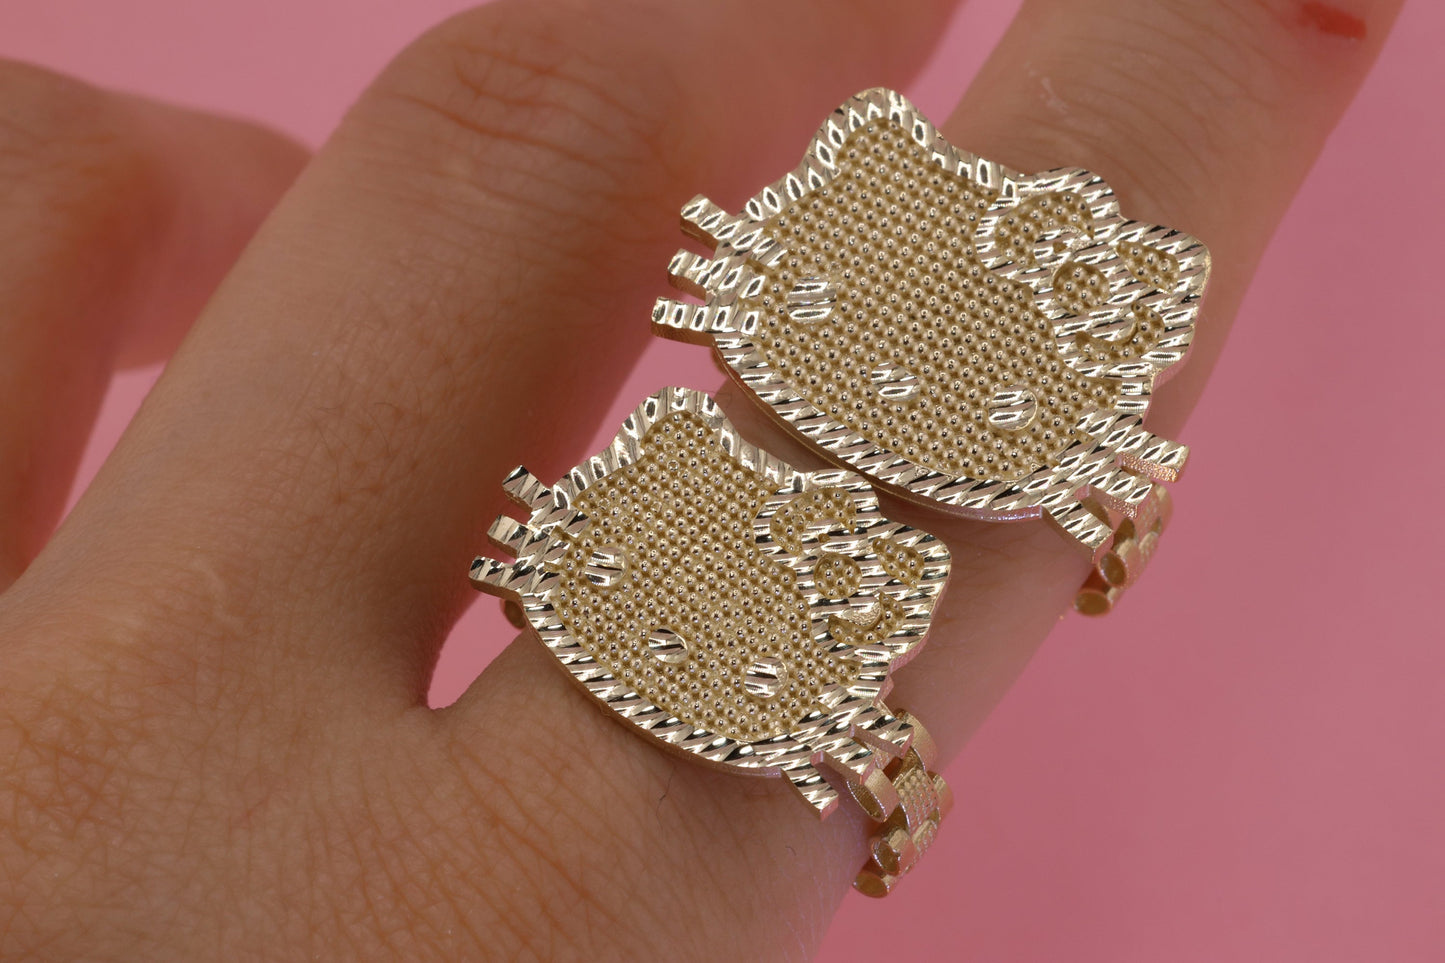 14K Solid Gold Kitty Rolex Style Band Ring